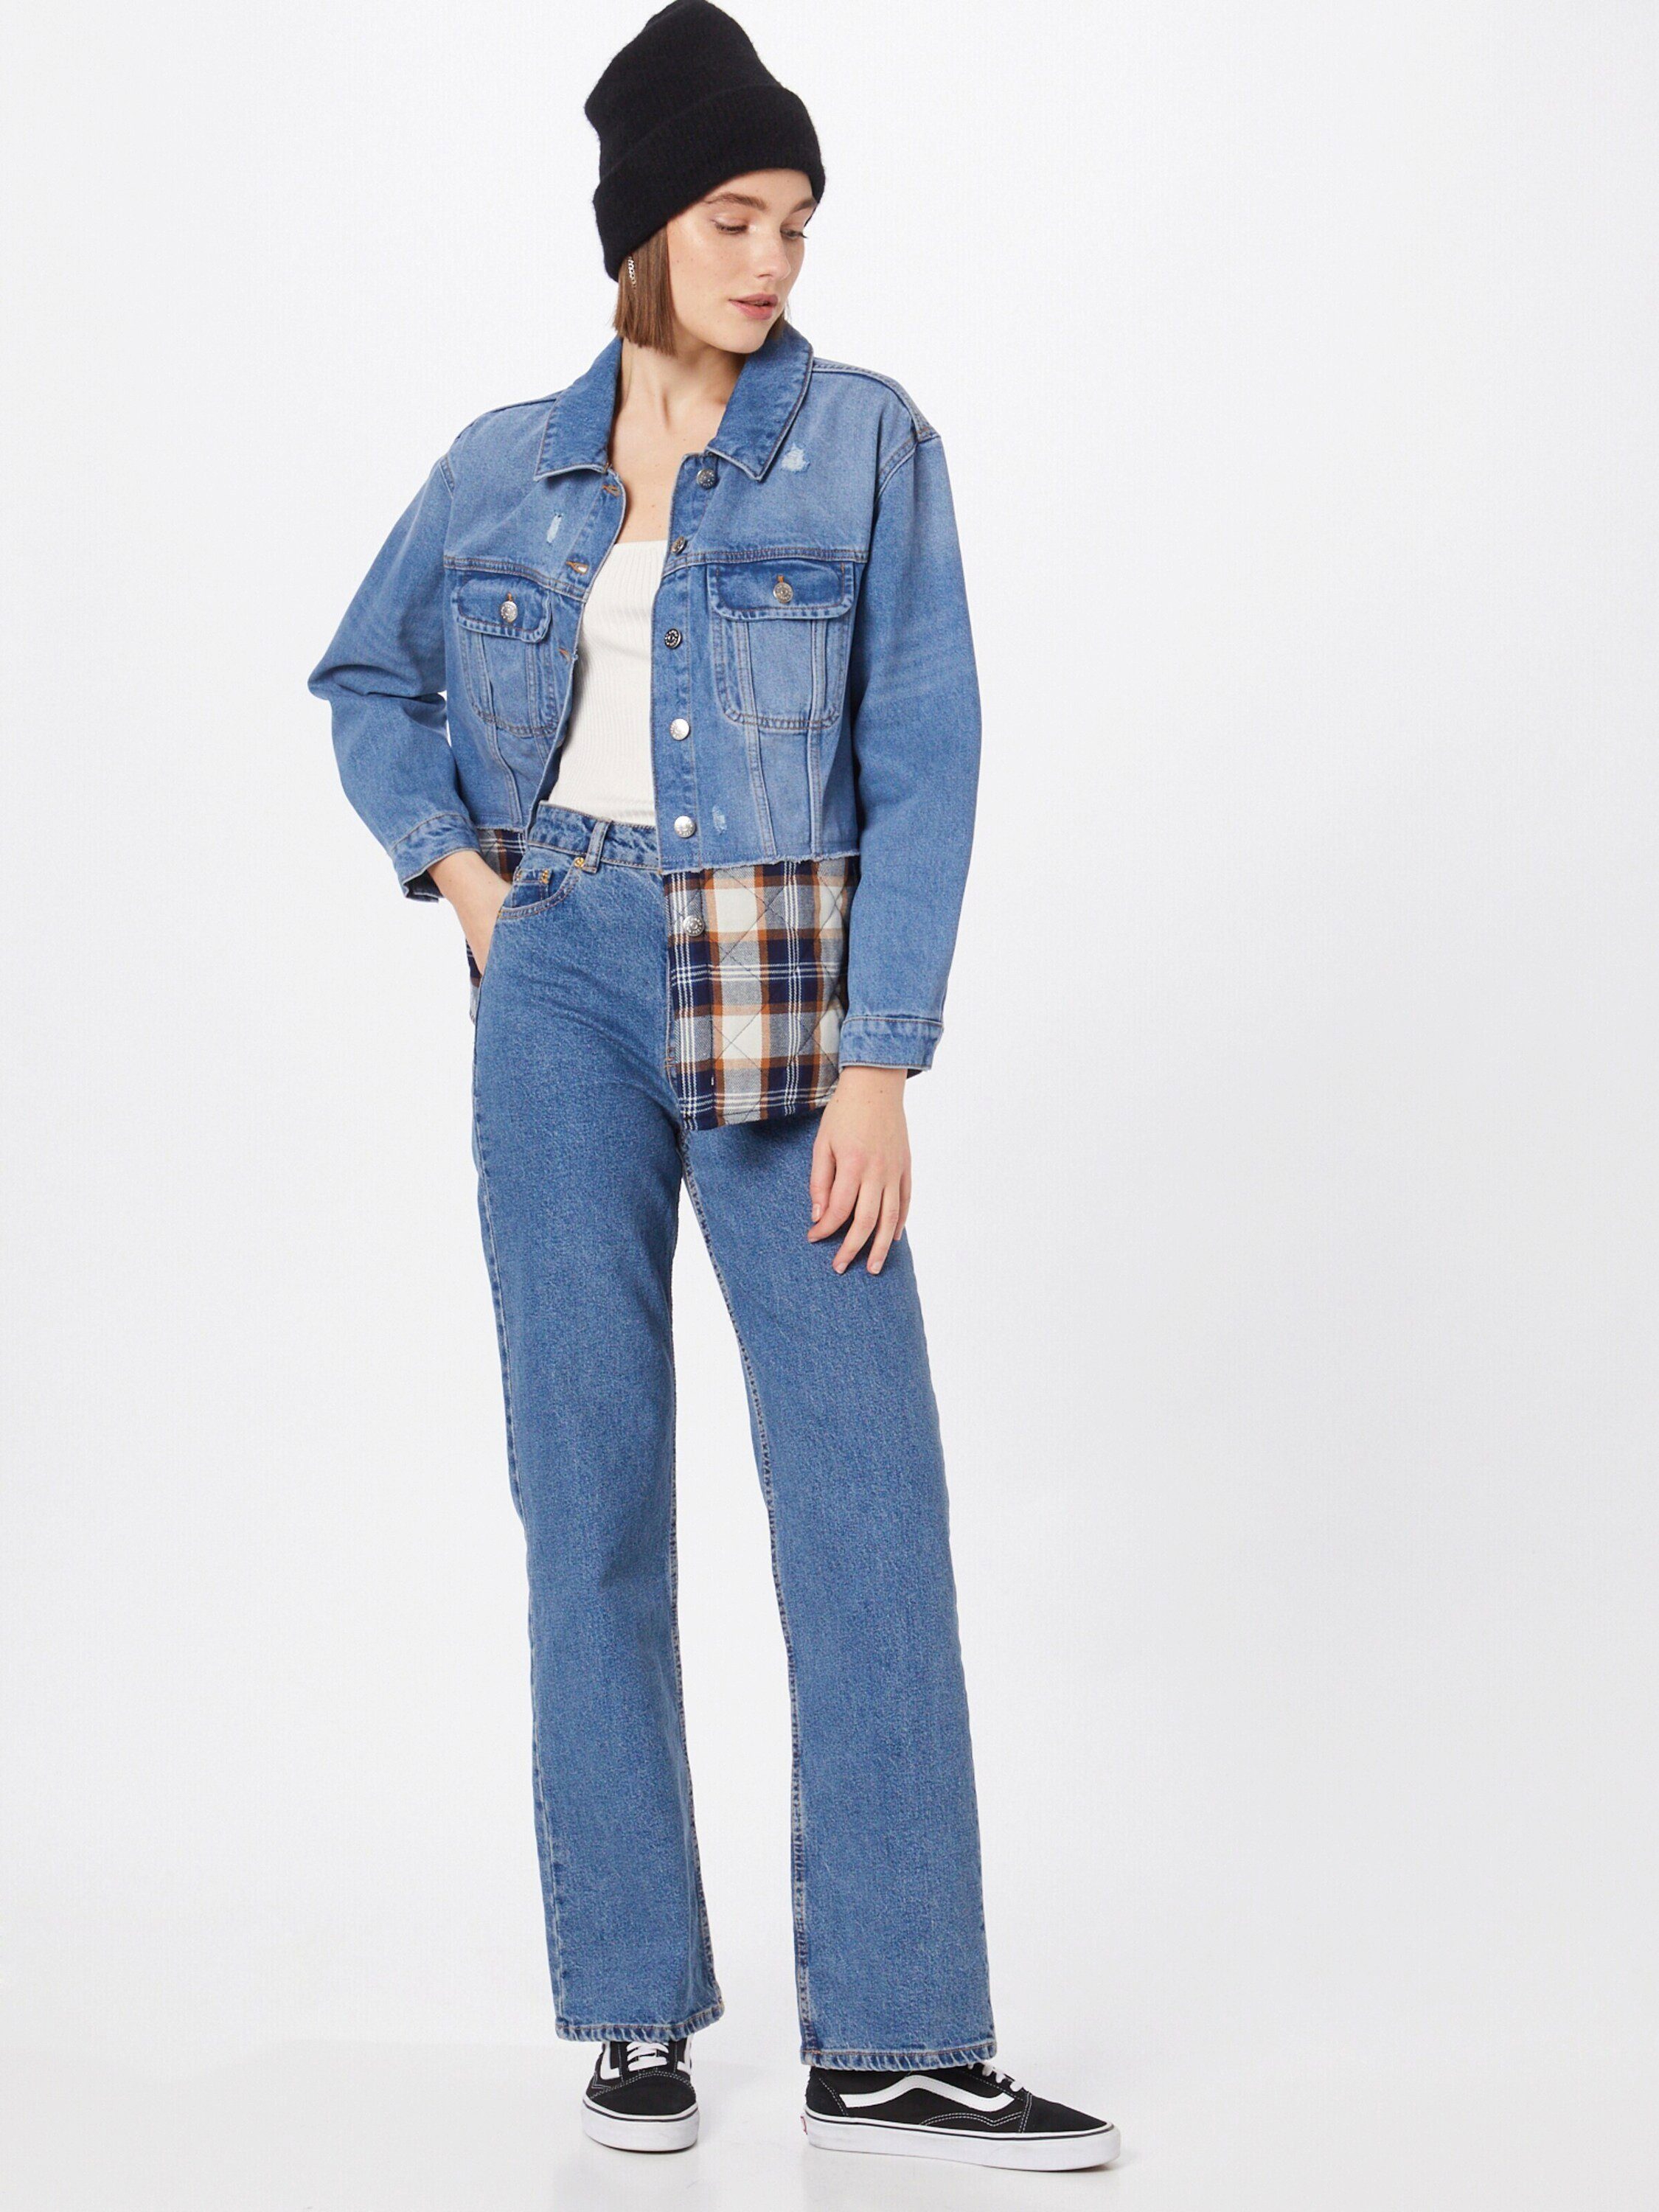 Weite Plain/ohne Weiteres ONLY Jeans Detail (1-tlg) Camille Details,